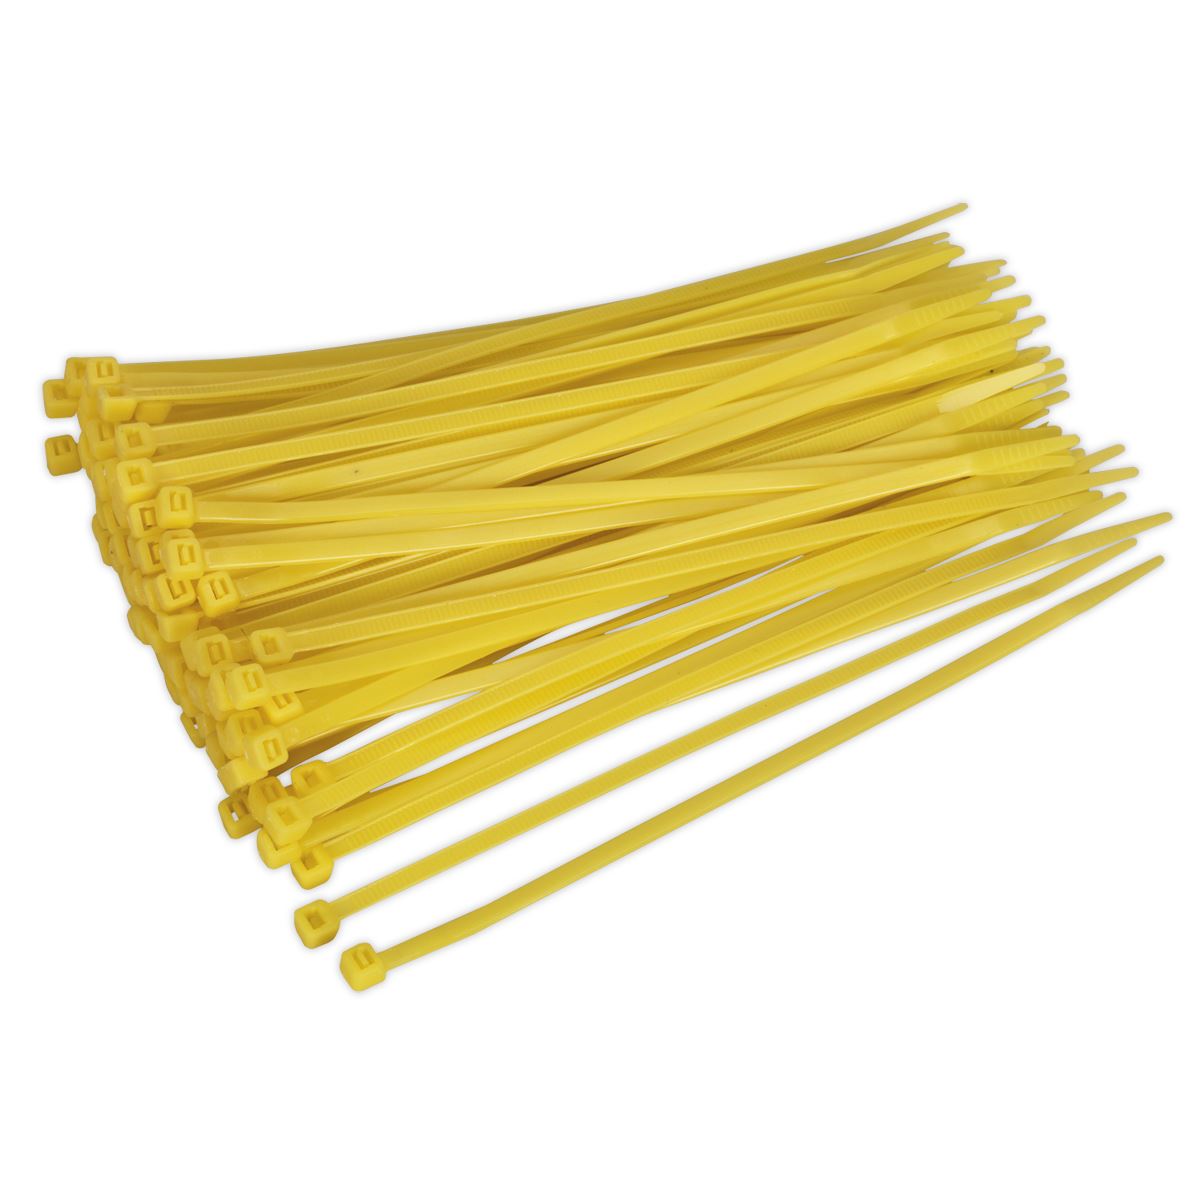 Sealey Cable Tie 200 x 4.4mm Yellow Pack of 100 CT20048P100Y